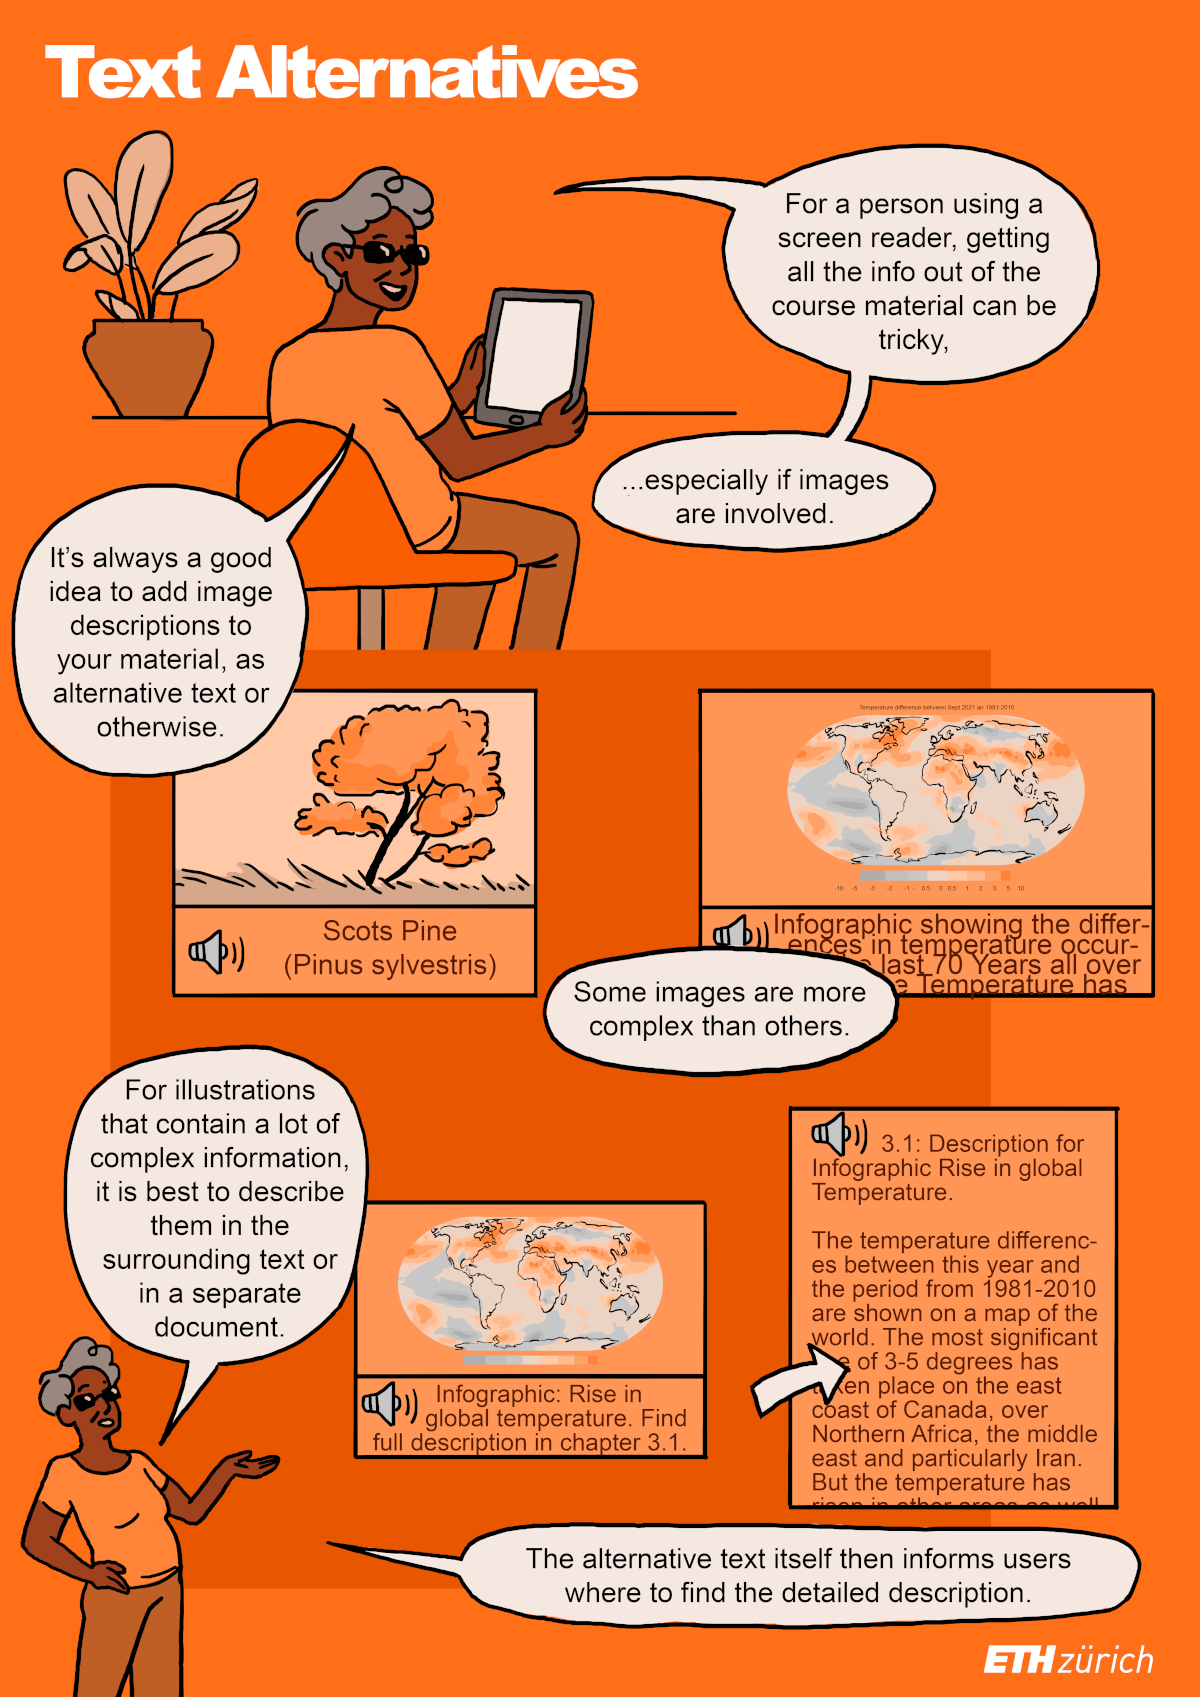 Enlarged view: Comic illustration on text alternatives in digital learning content: Visual representations of facts, contexts and processes are more and more common in teaching. For blind people or people with severe visual impairments, it is important that all information is also available as text. When using visual material, authors should therefore always think carefully about what central information they want to convey and provide this information in text form.